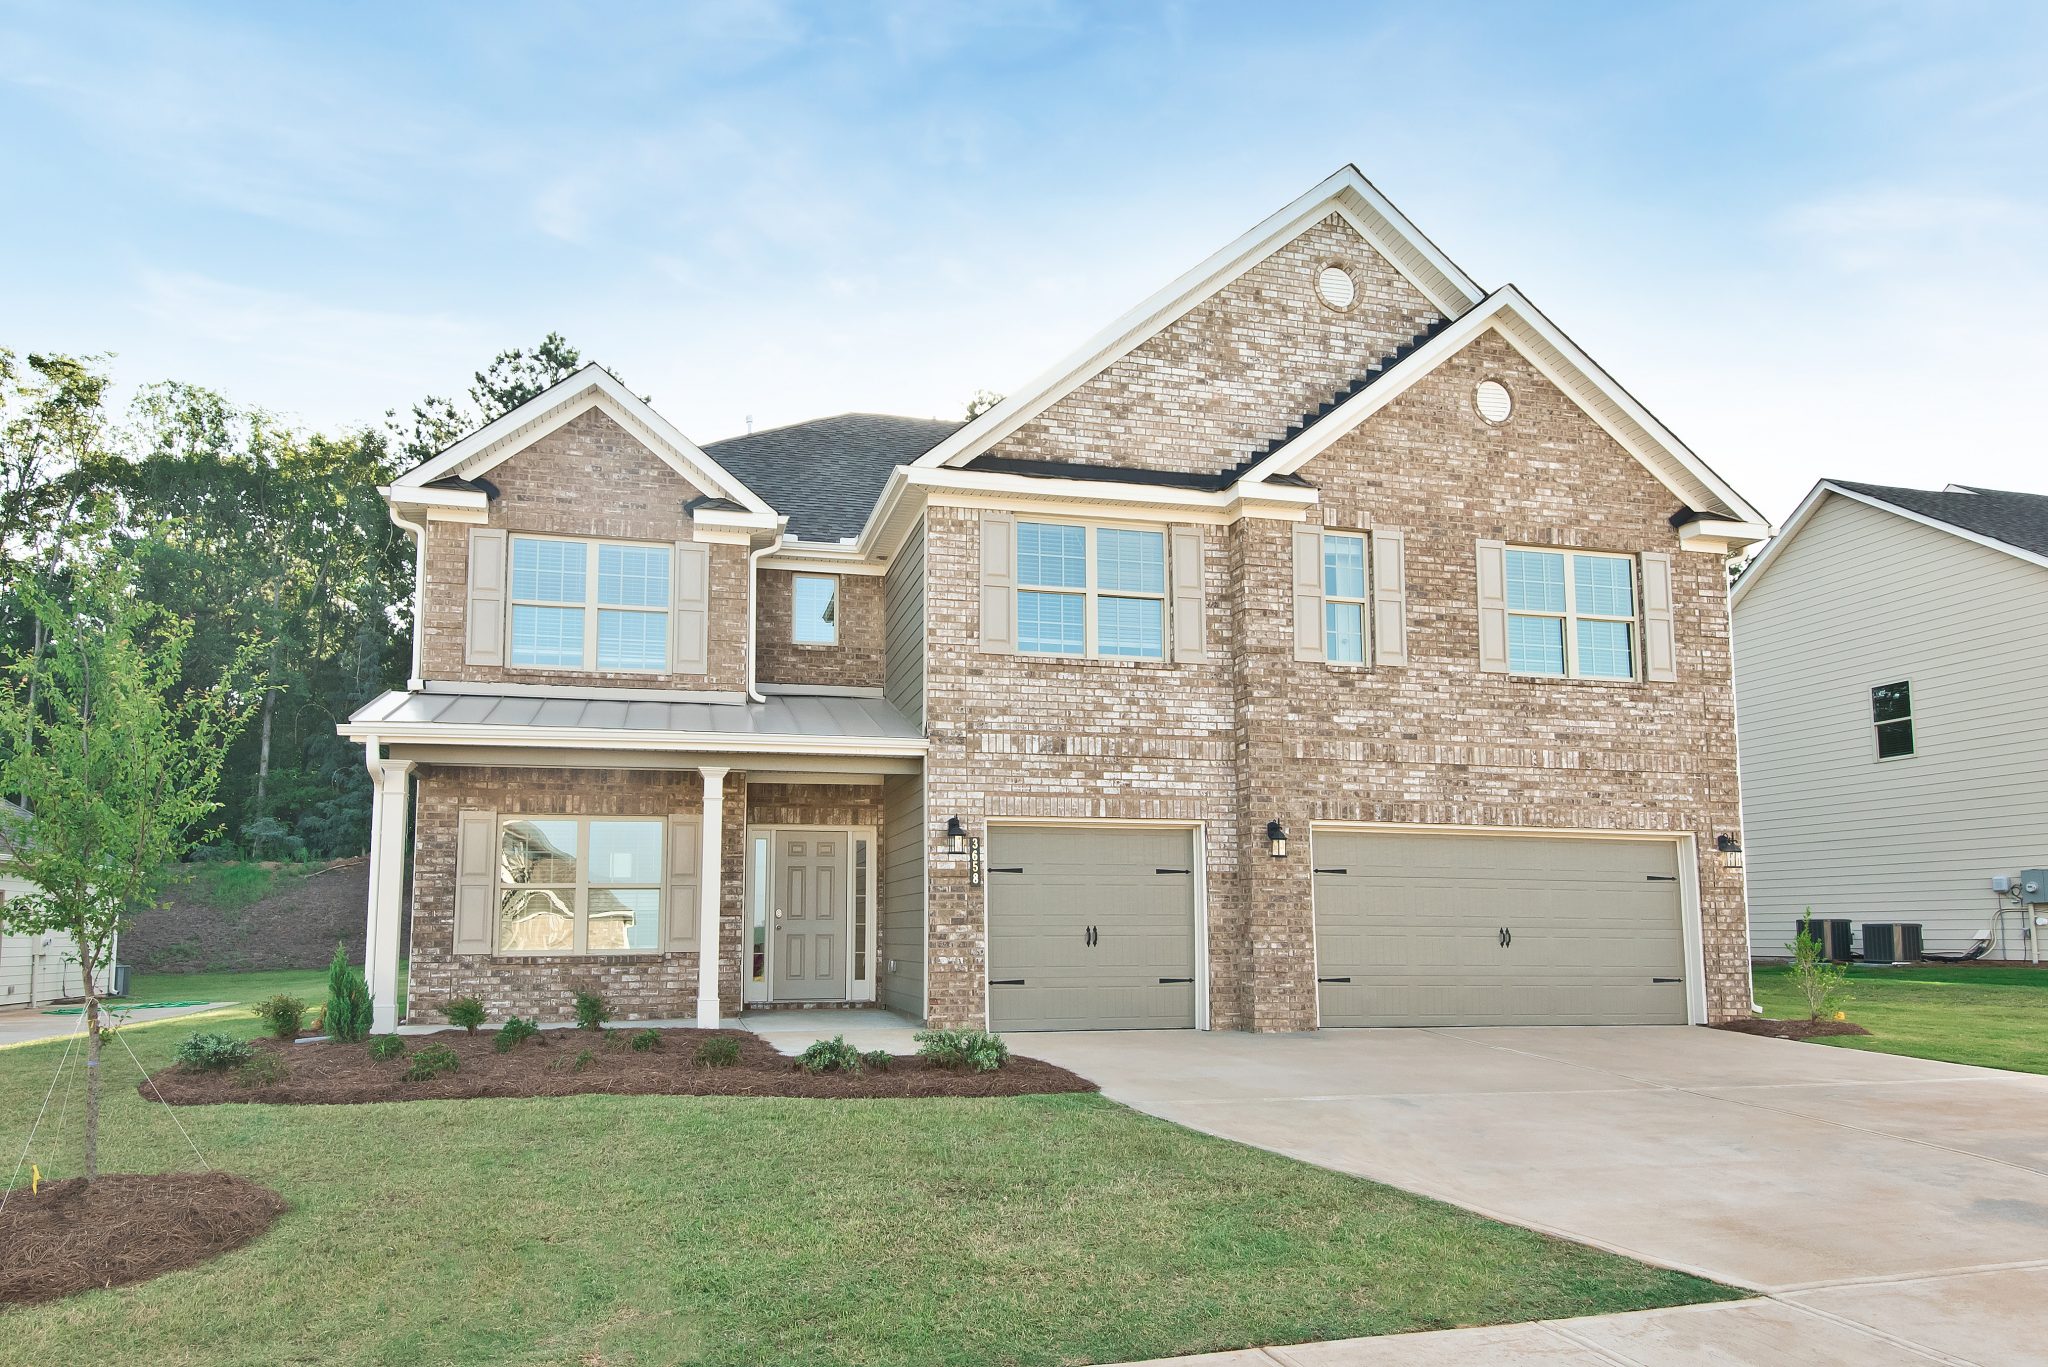 A home available to live near Snellville in Ozora Lake